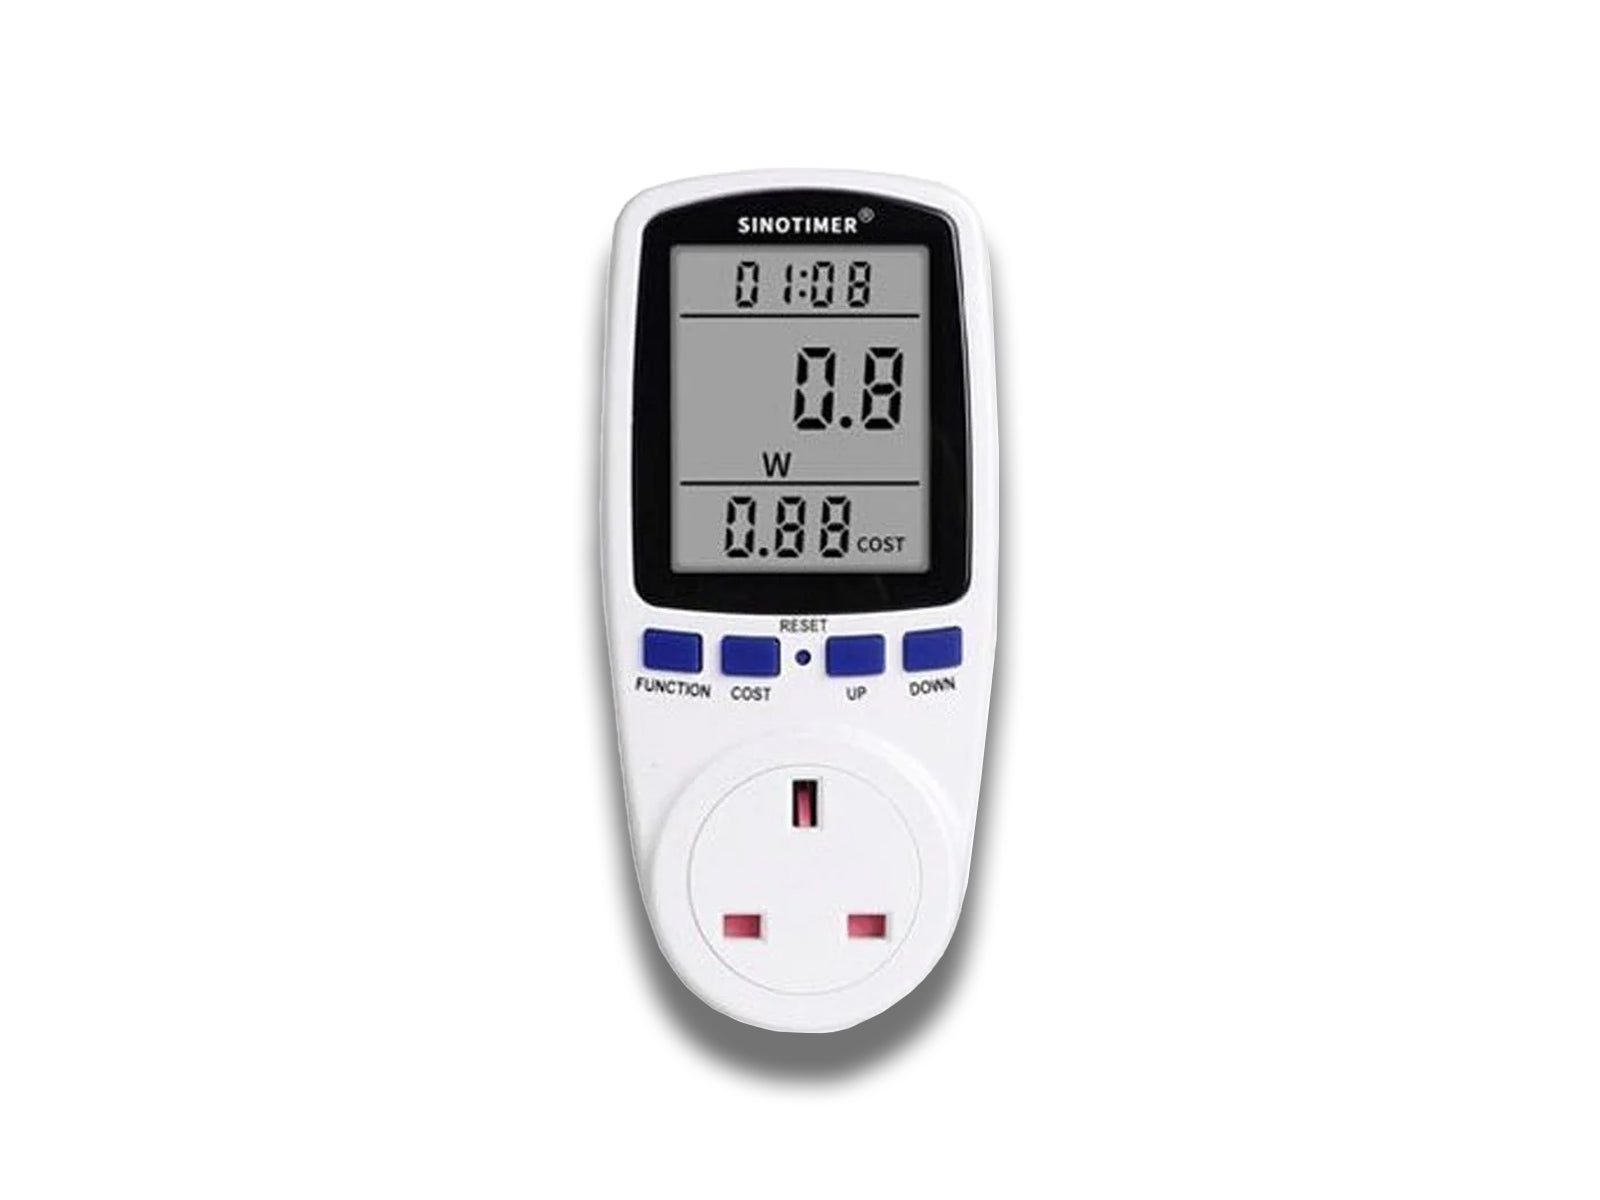 Image shows front view of the energy monitor on white background